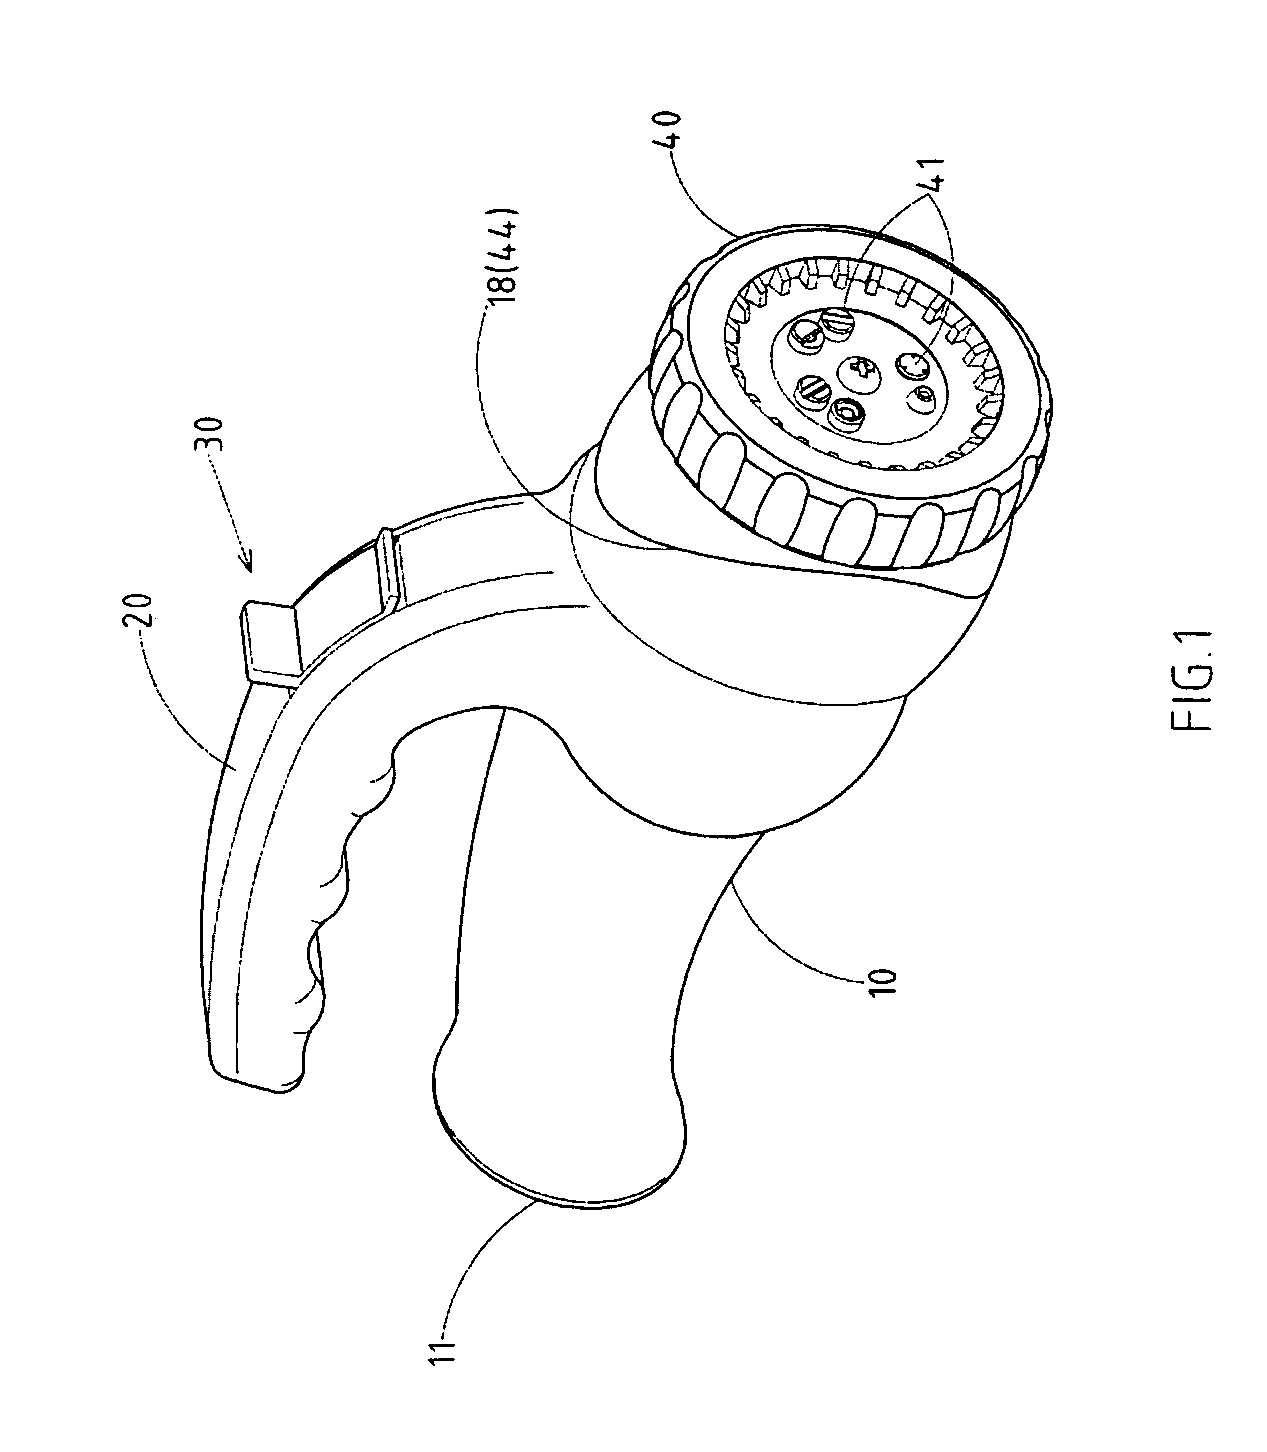 Garden hose nozzle provided with a whirling action